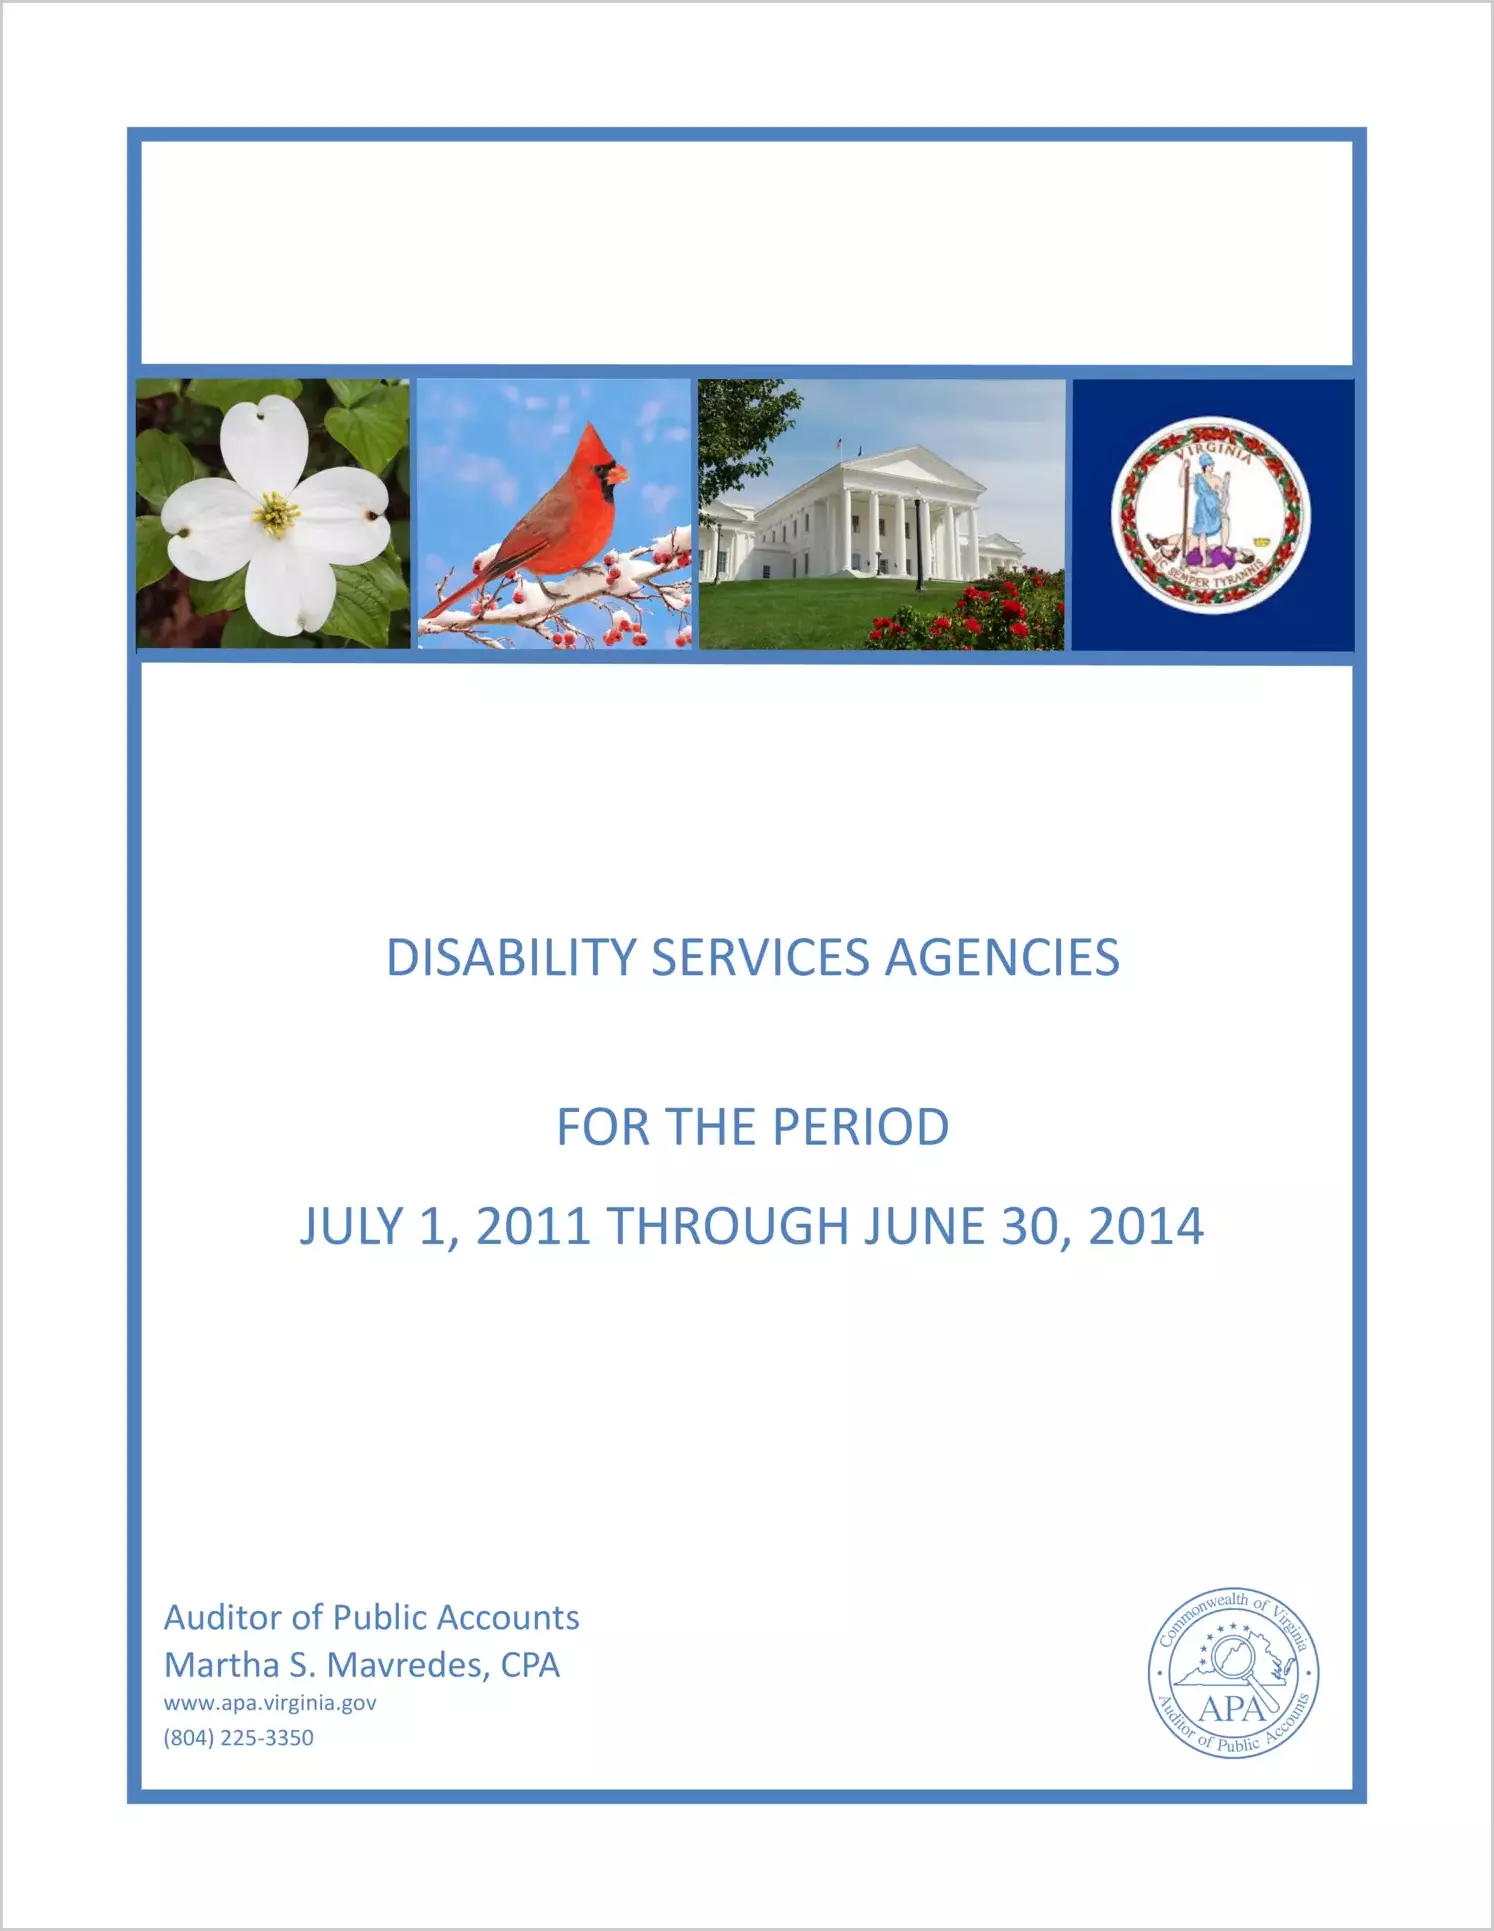 Disability Services Agencies for the period July 1, 2011 through June 30, 2014